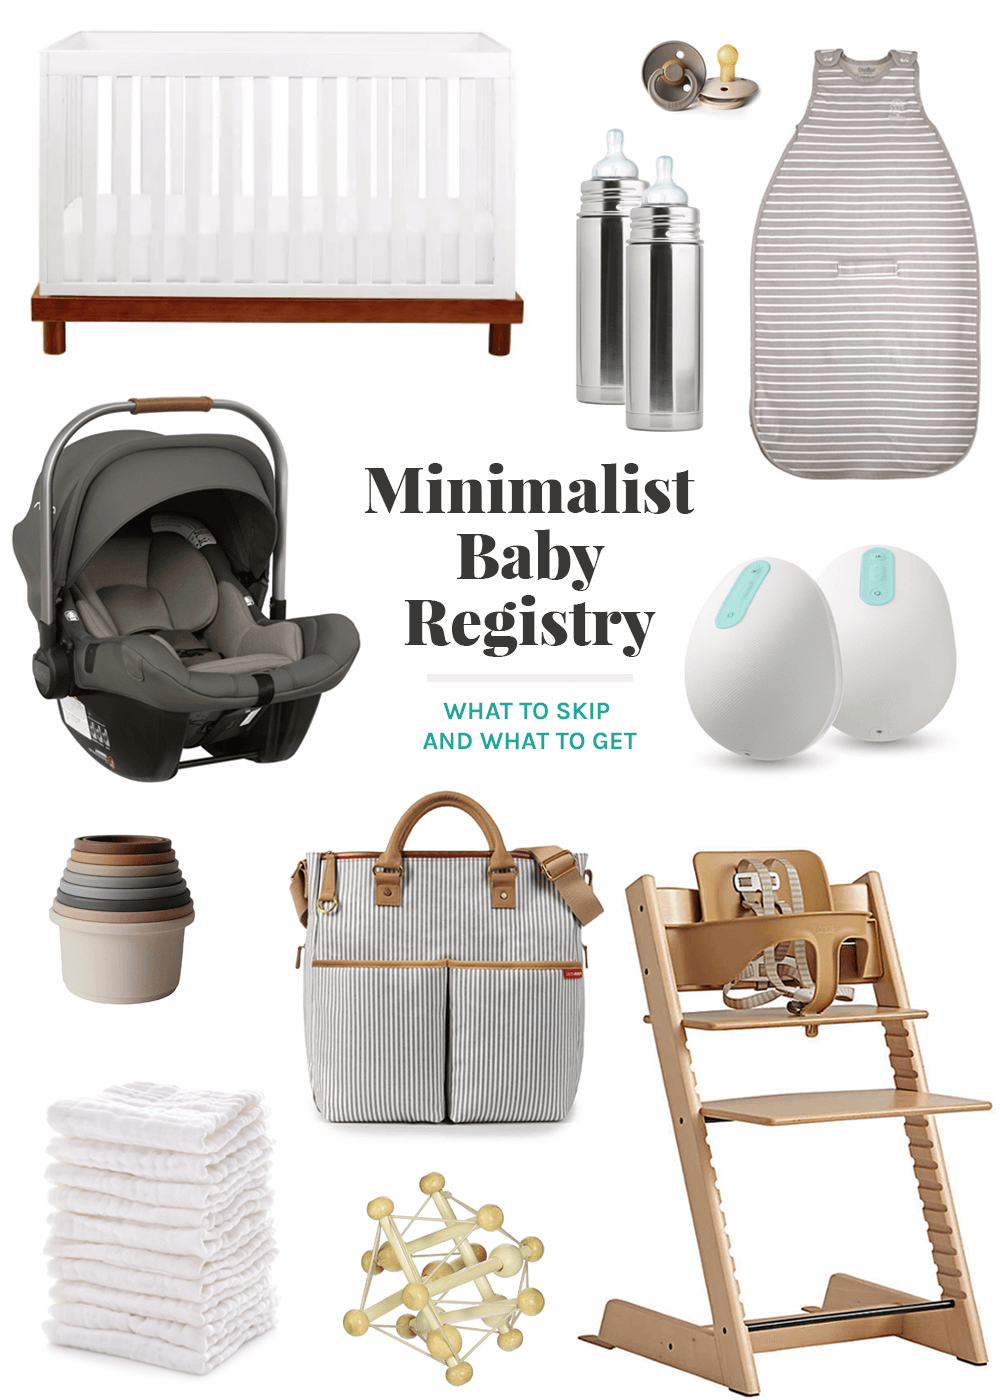 https://www.thefauxmartha.com/wp-content/uploads/2021/02/minimal_baby_registry.png